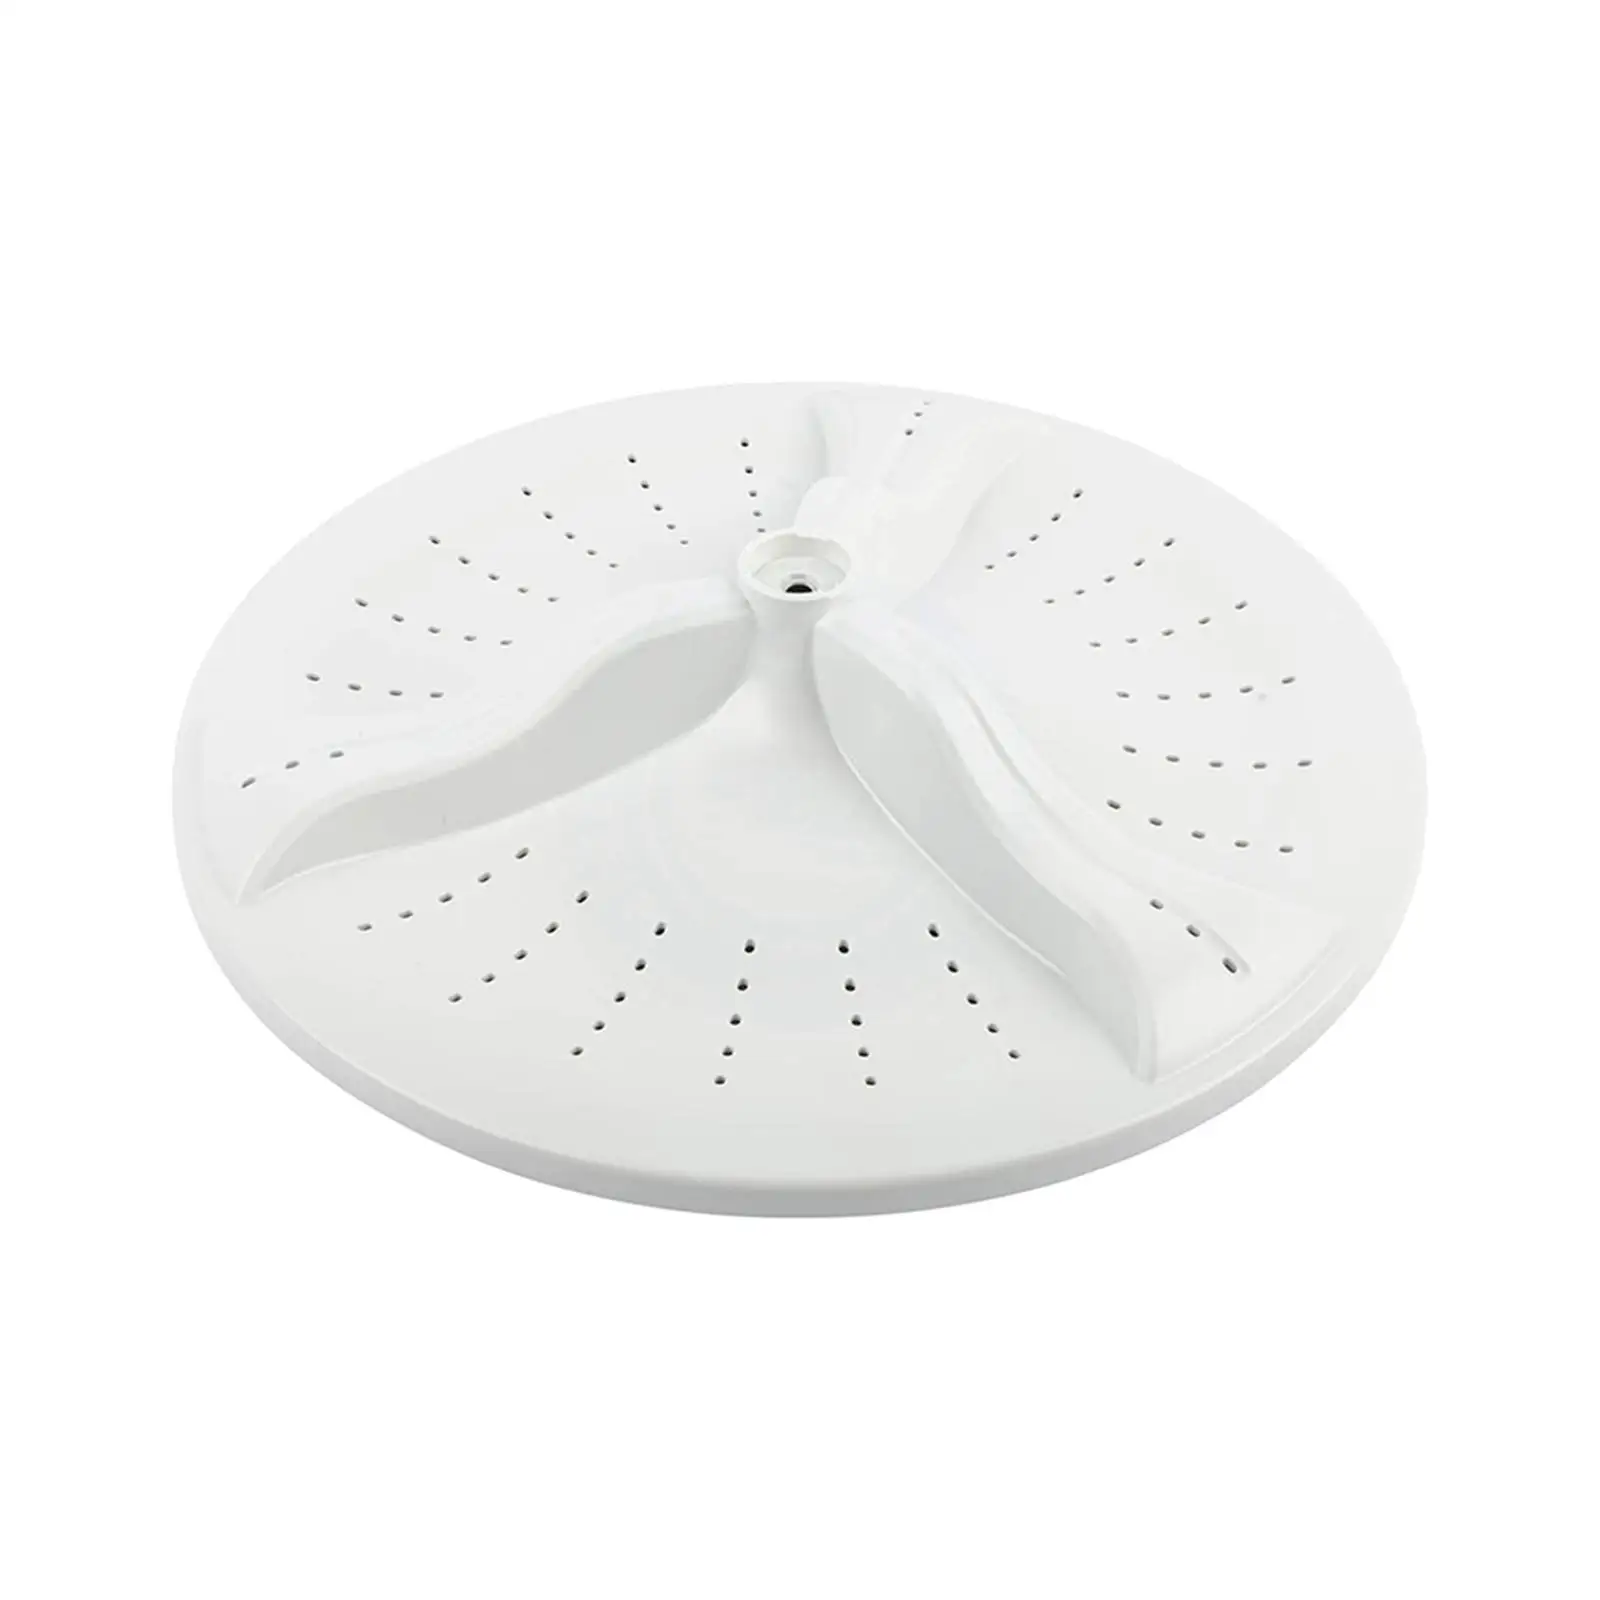 Washing Machine Wash plate Lightweight Universal Round Easy Installation 41cm Replaces Part for Bathroom Home Apartment Hotel